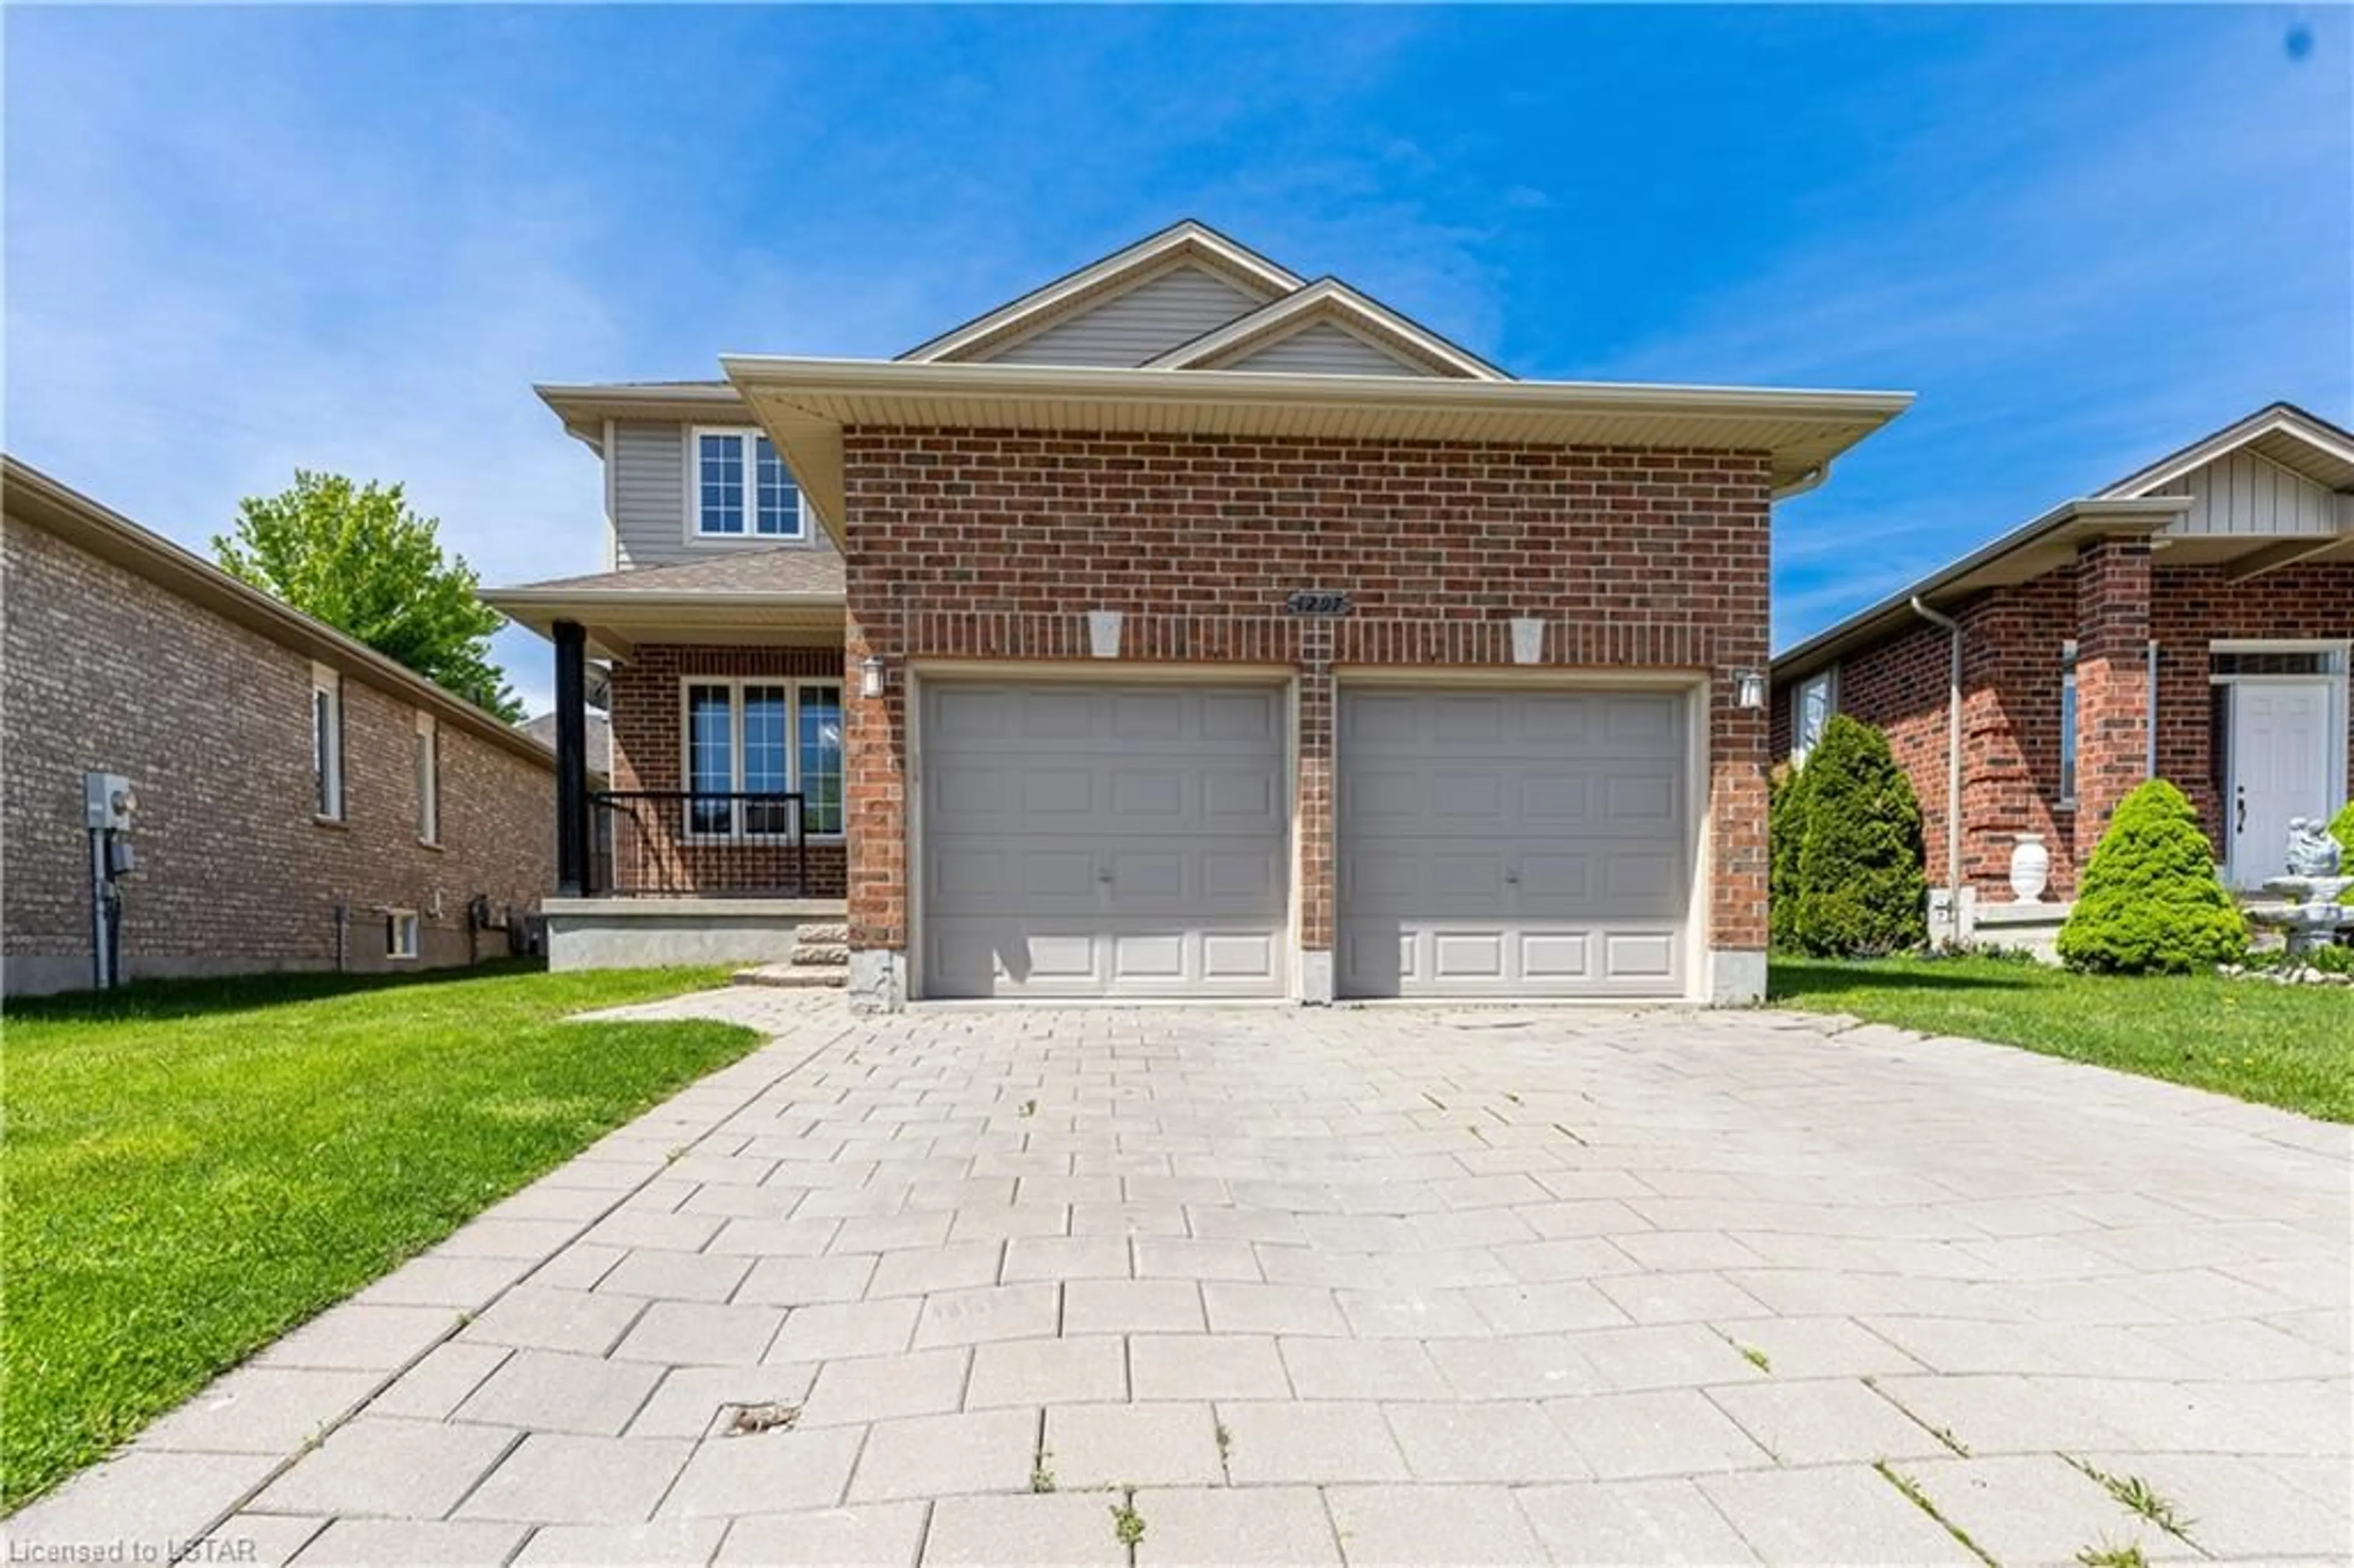 Frontside or backside of a home for 1297 Whetherfield St, London Ontario N6H 0E5